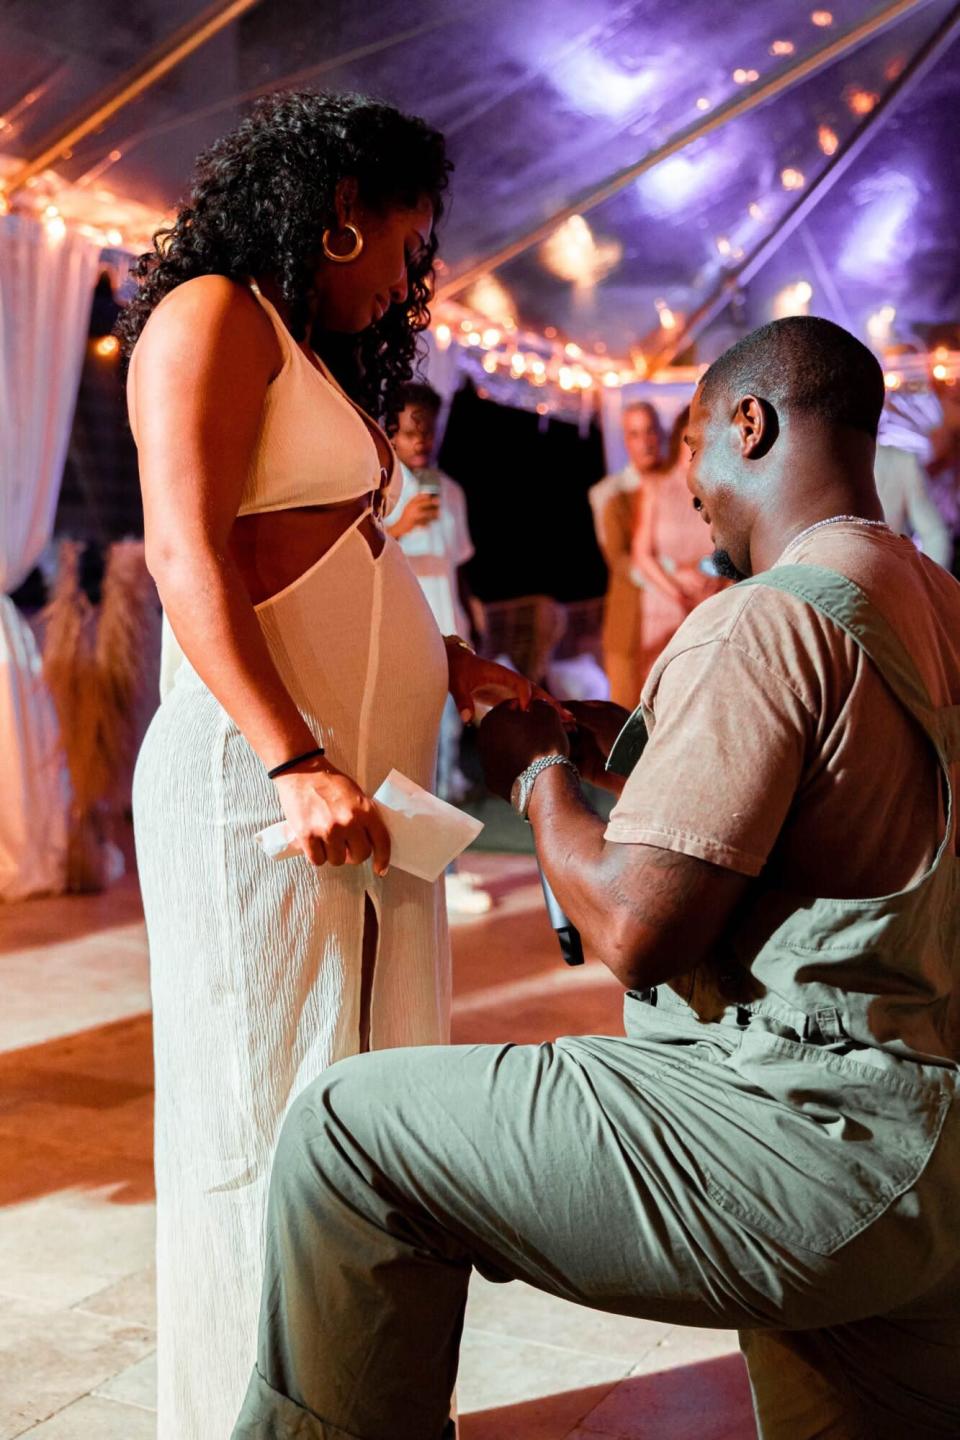 NFL Champ Sony Michel is Engaged with a custom KAY ring!. Kay Jewelers